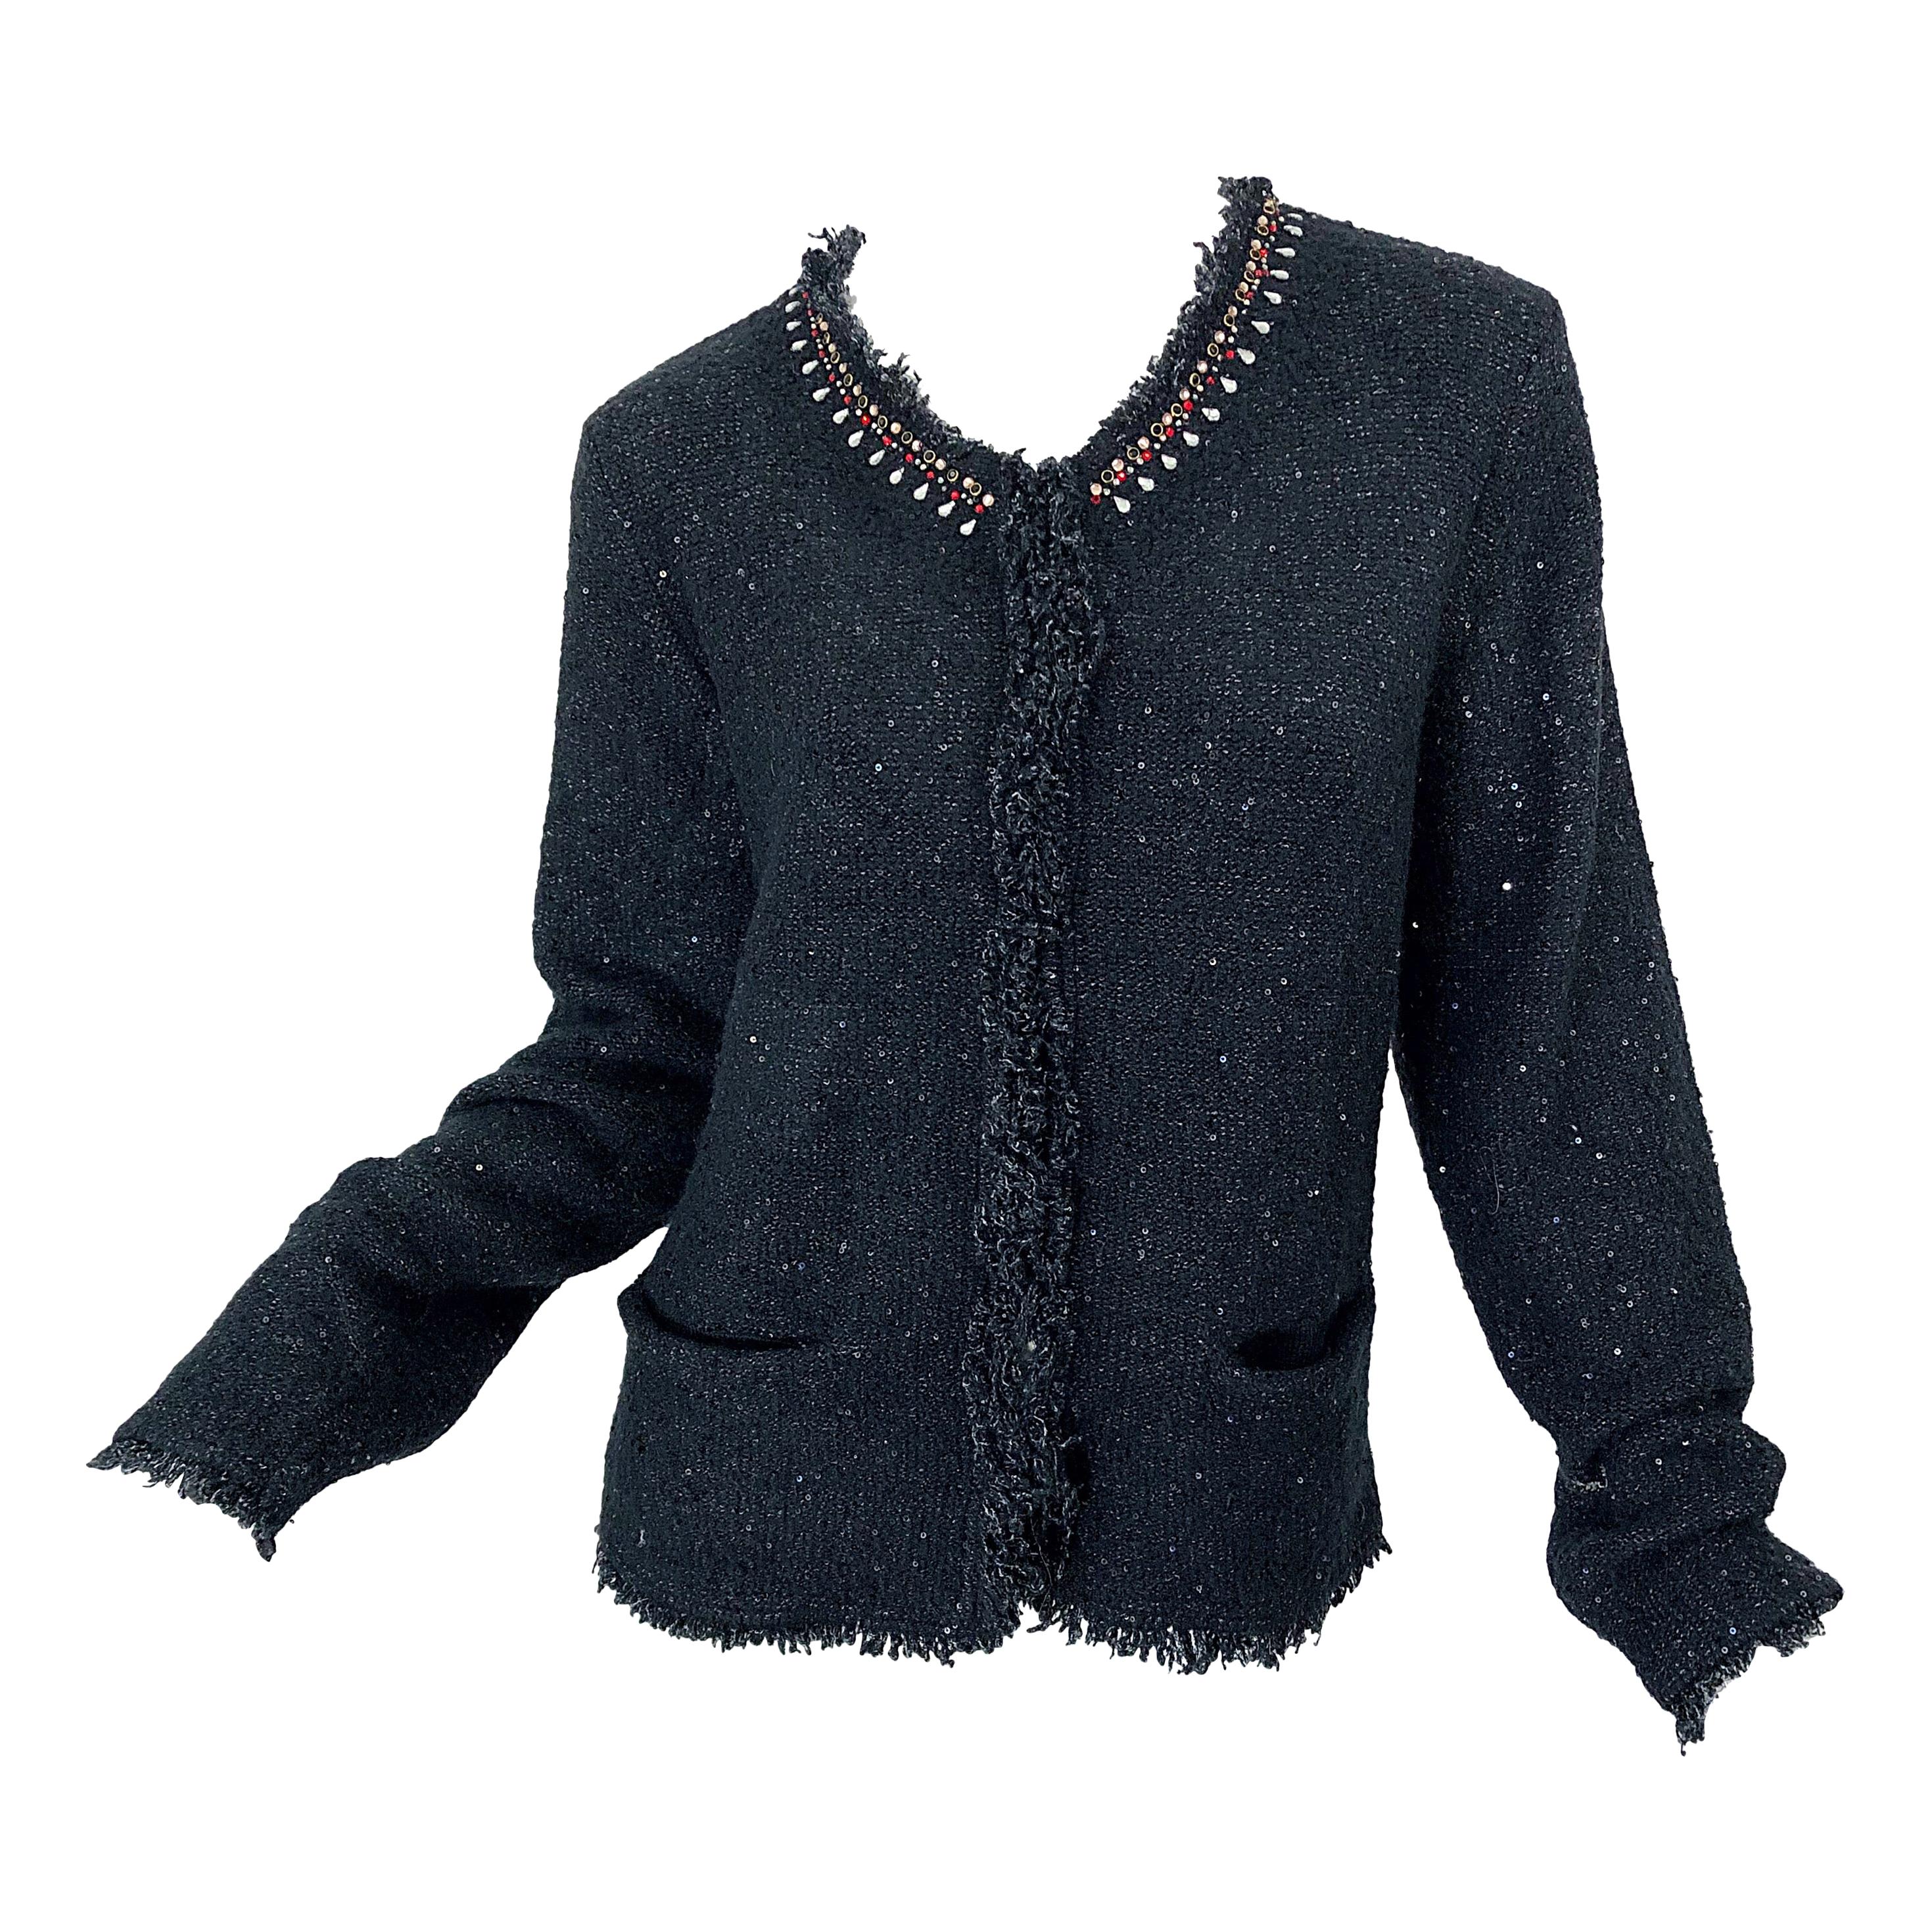 Beaded Sweaters - 55 For Sale on ...